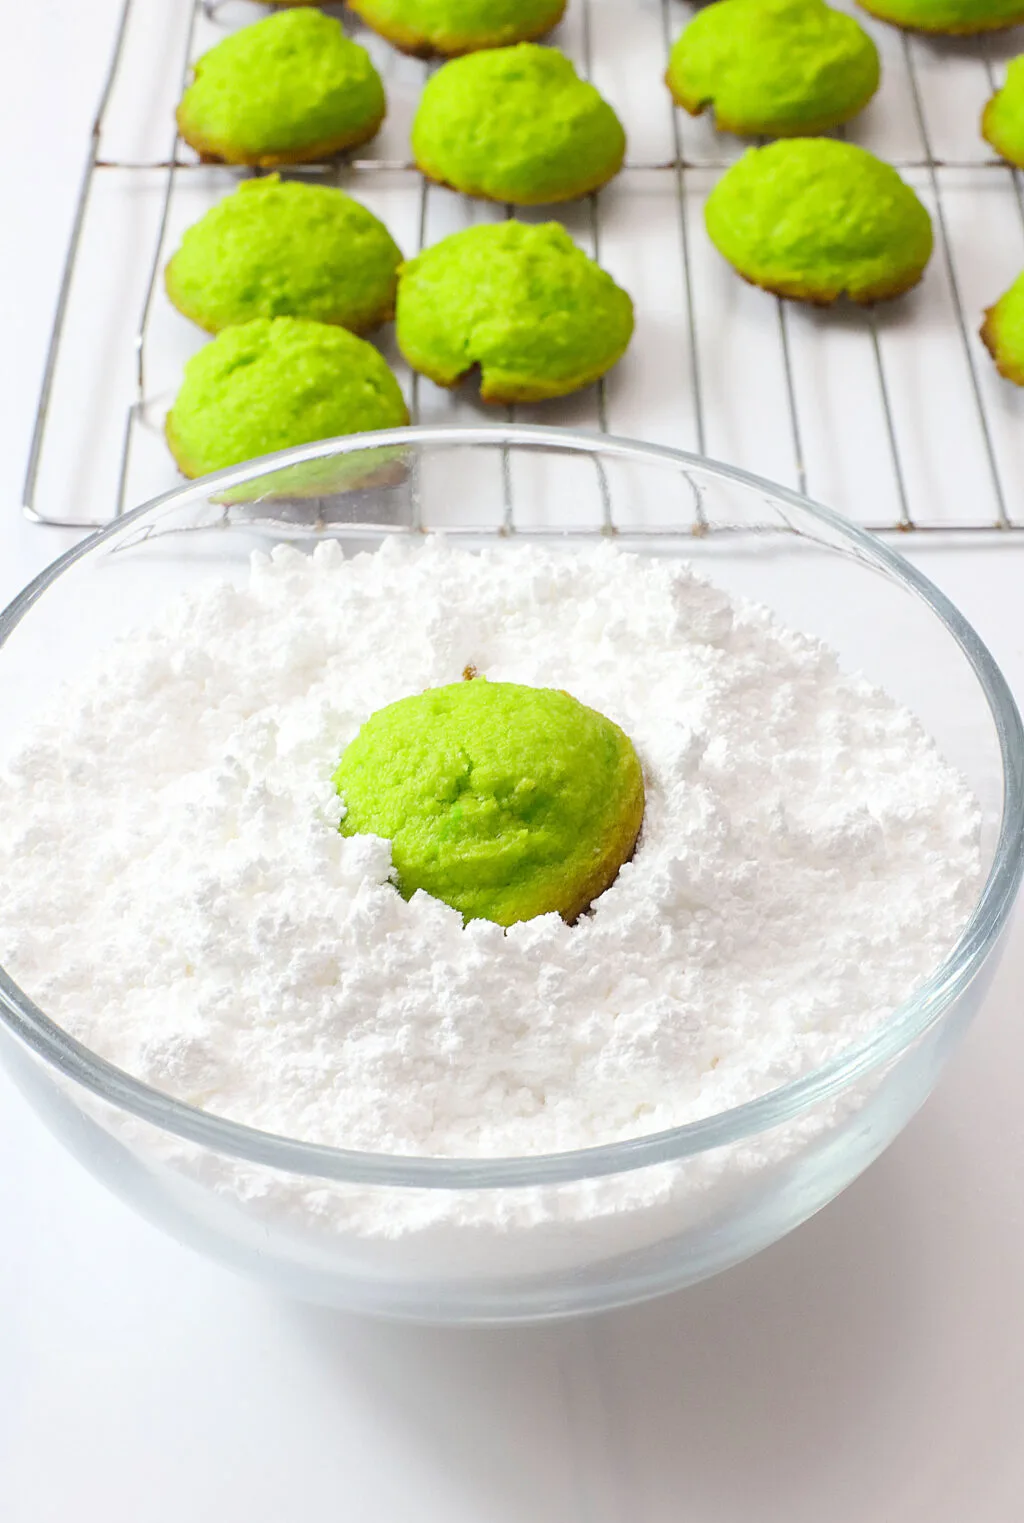 rolling green cookies into powdered sugar